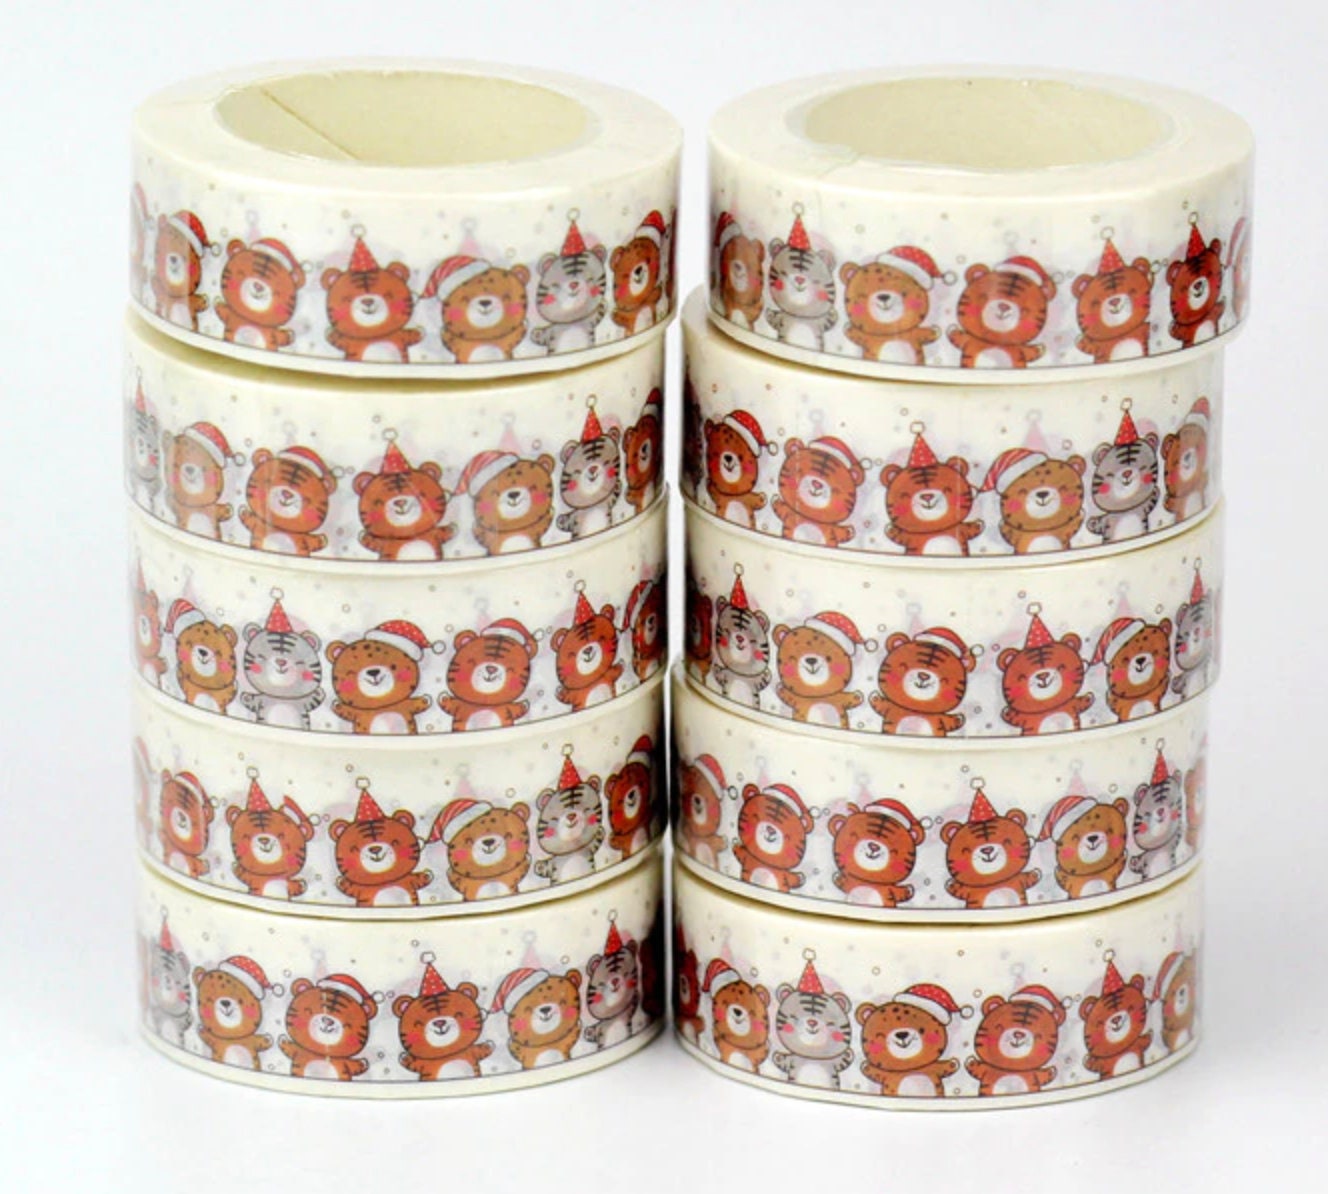 Tiger Tape, adhesive backed tape perfect for many sewing applications.  Choose half or quarter inch.